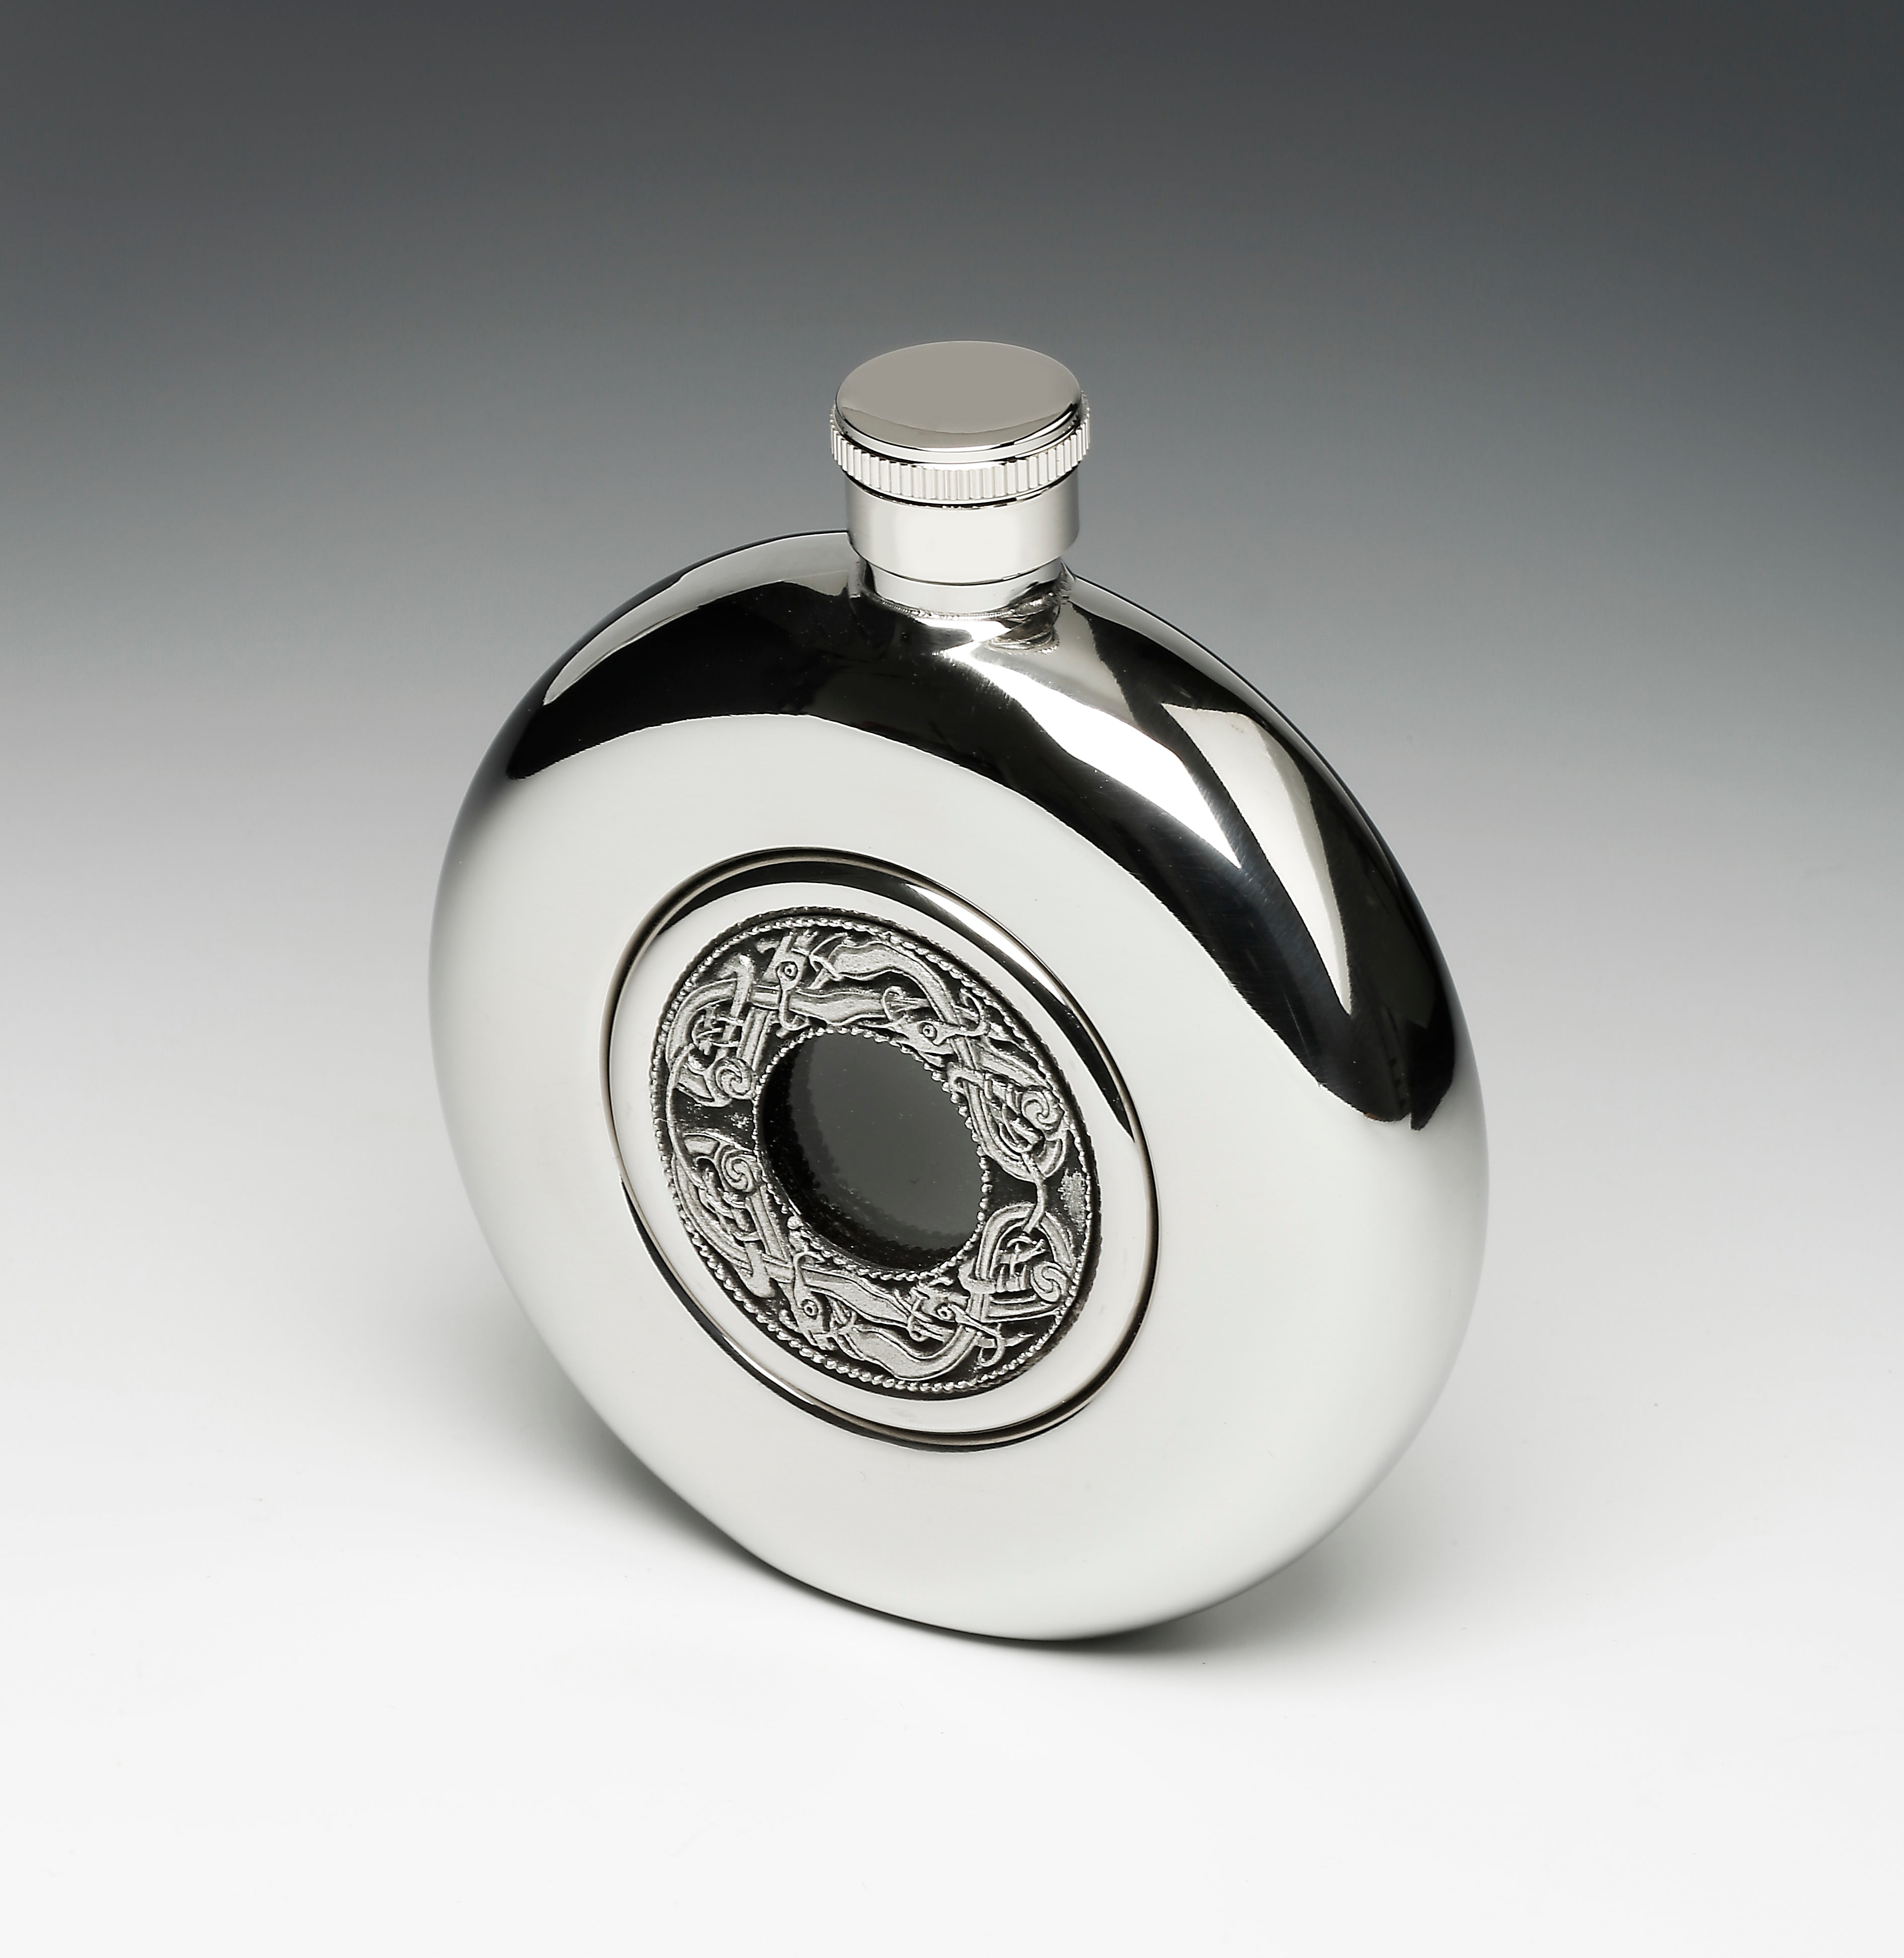 Round Whiskey Hip Flask with Glass Center and Celtic Birds Design